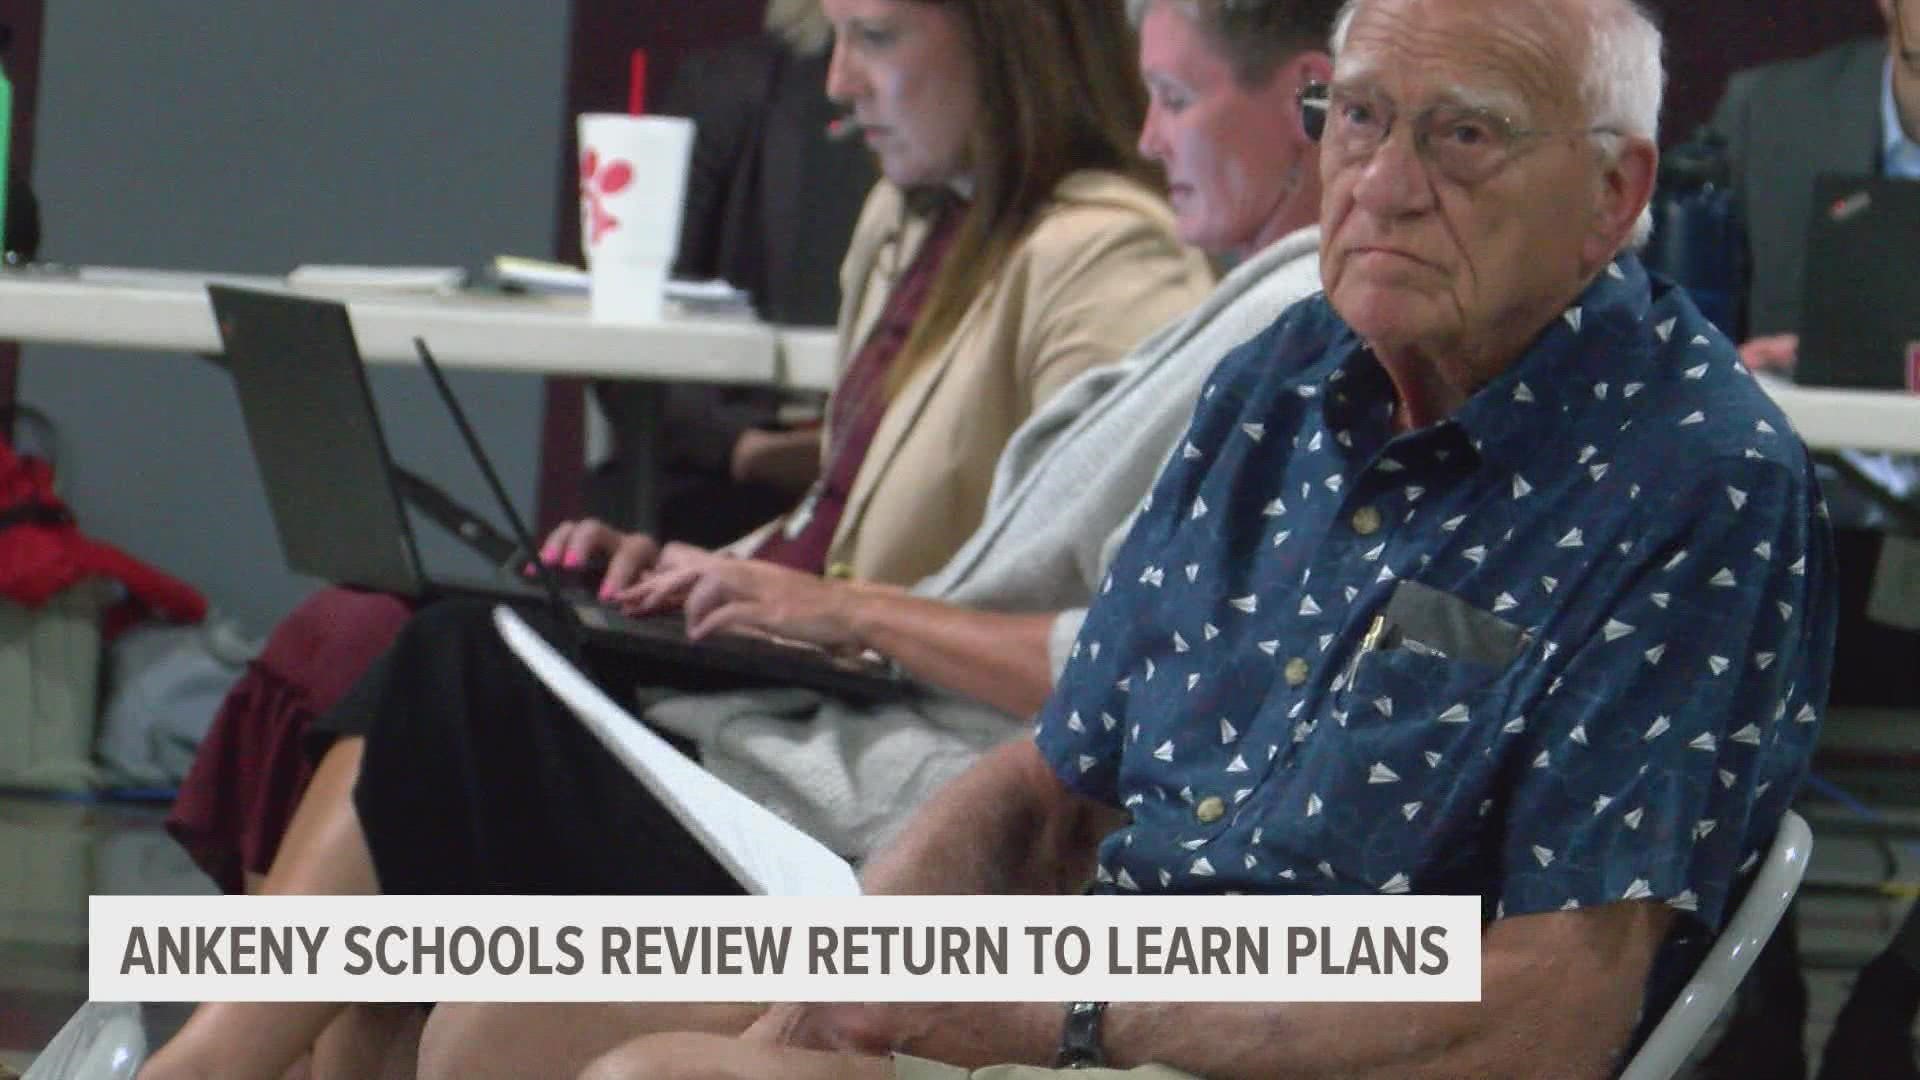 The Monday meeting was the first of many that will be dedicated to revising the school district's plans.